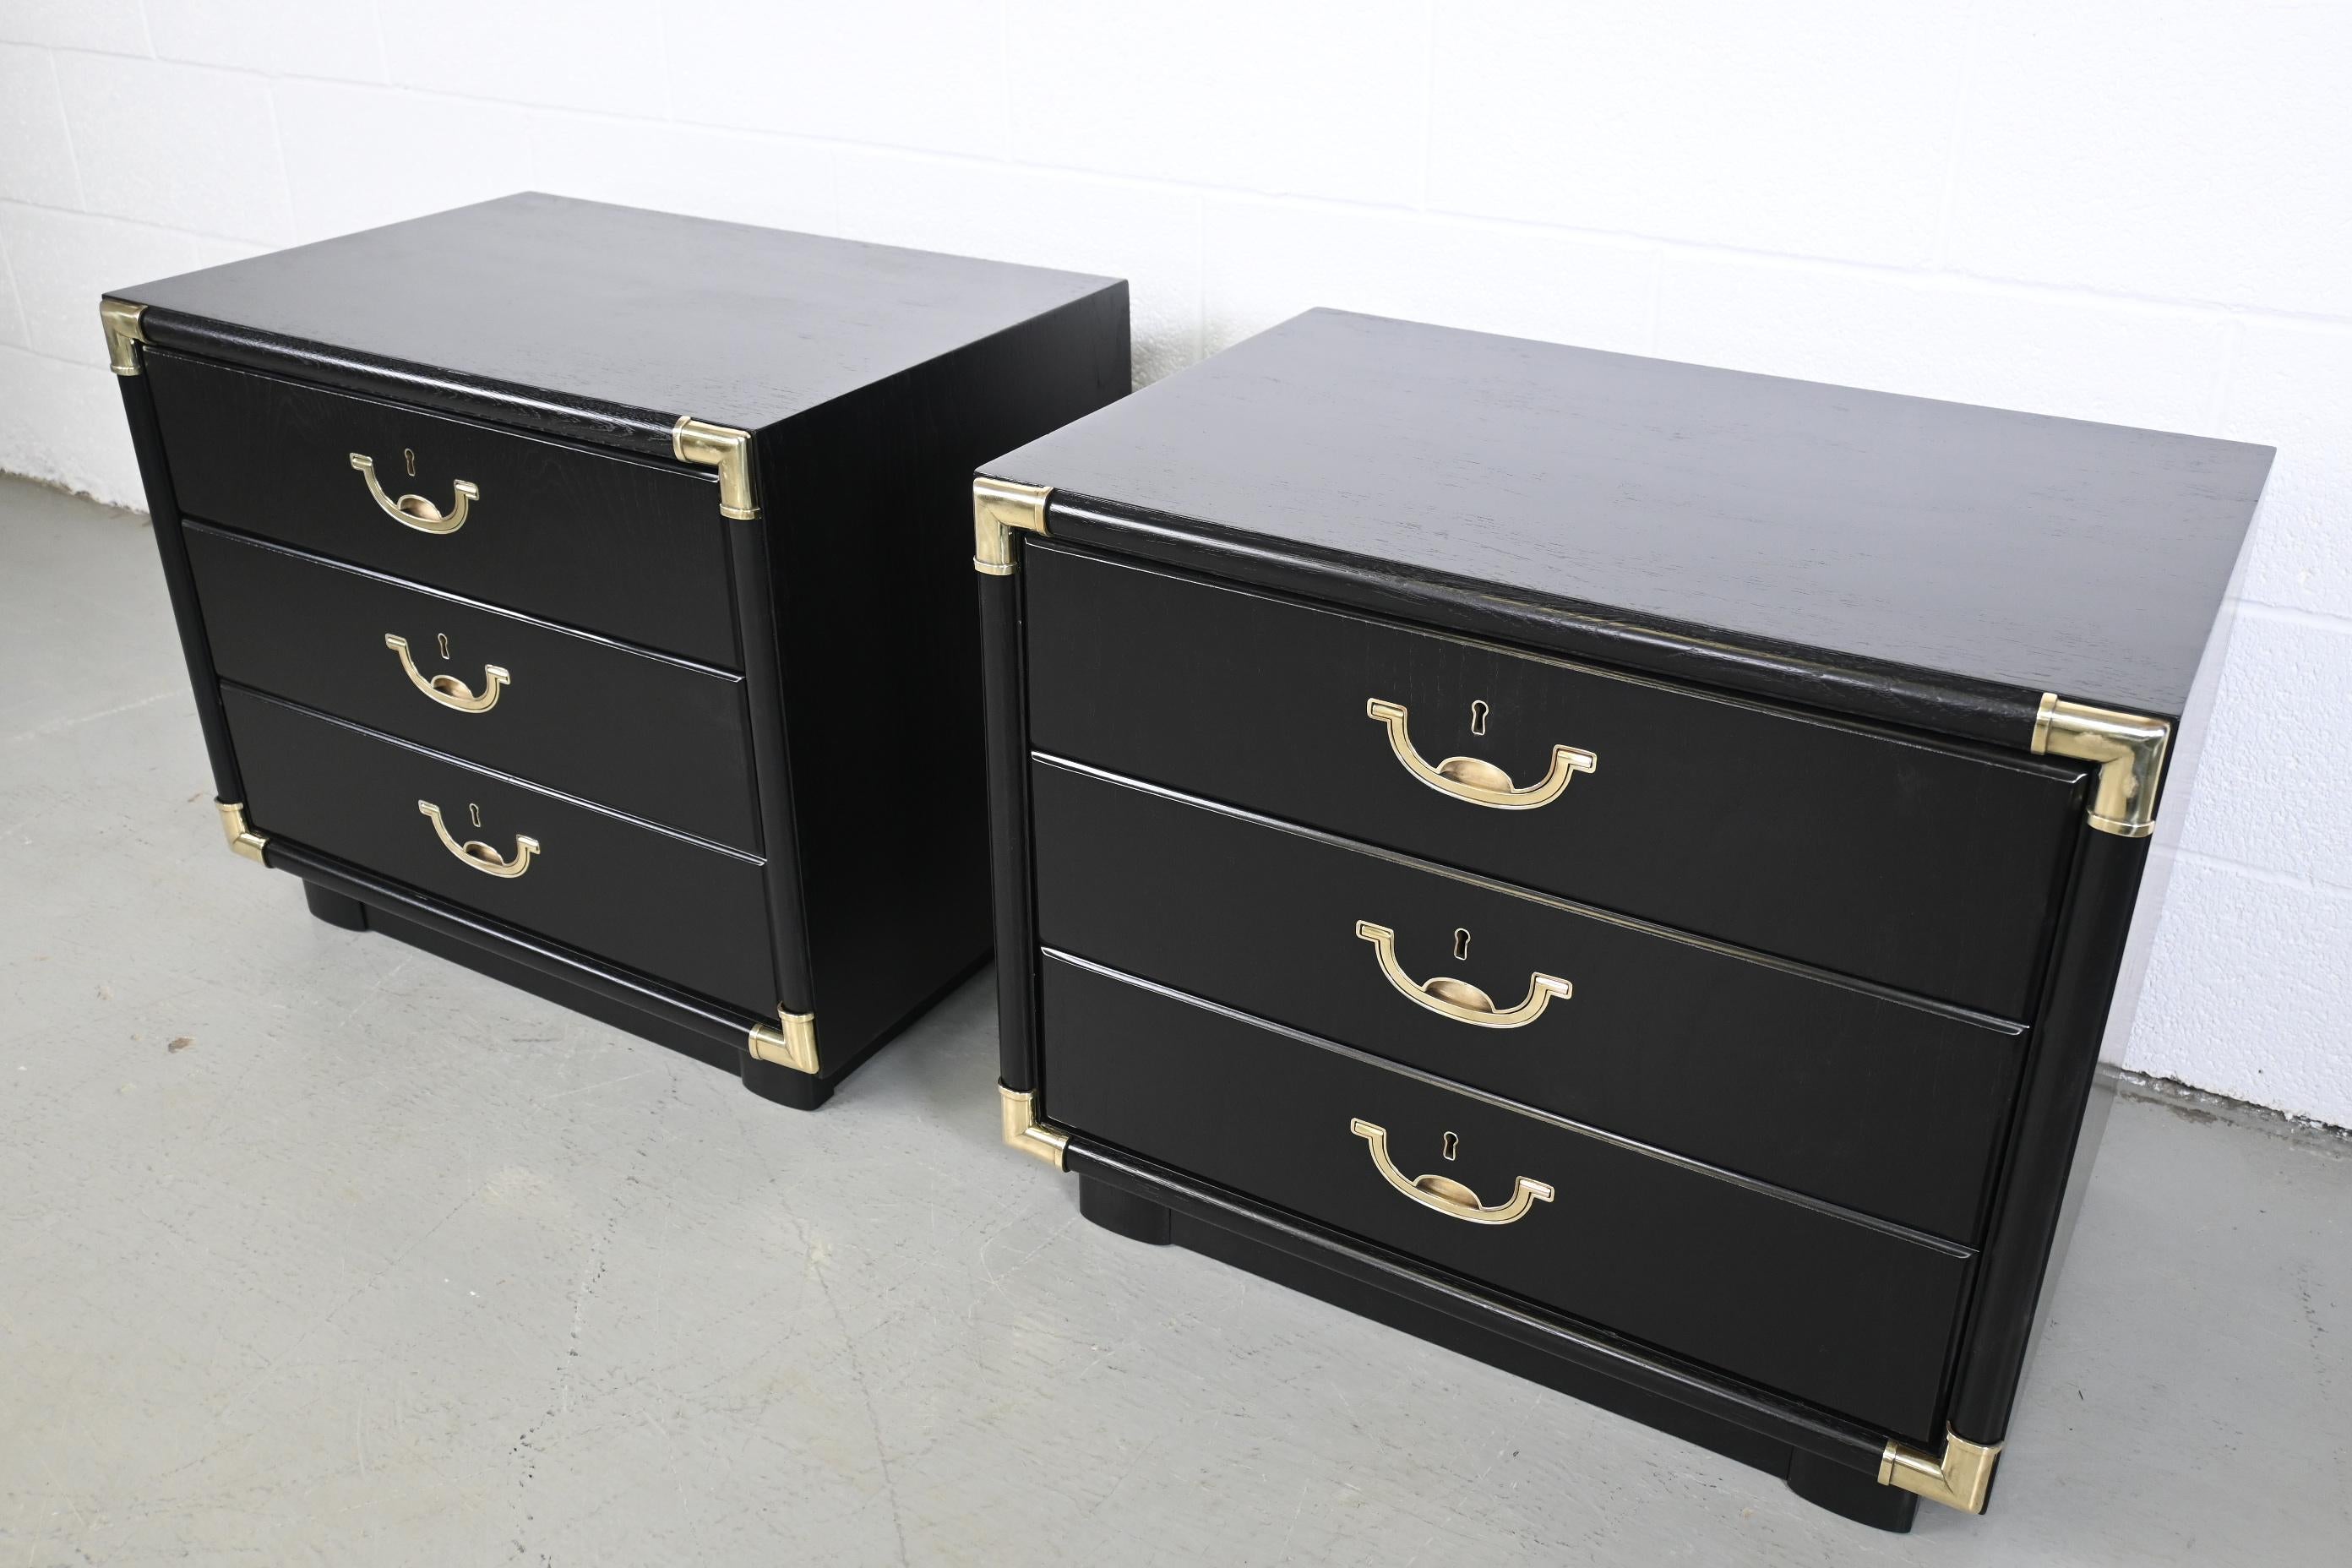 Late 20th Century Drexel Accolade Campaign Style Black Lacquered Nightstands - a Pair For Sale